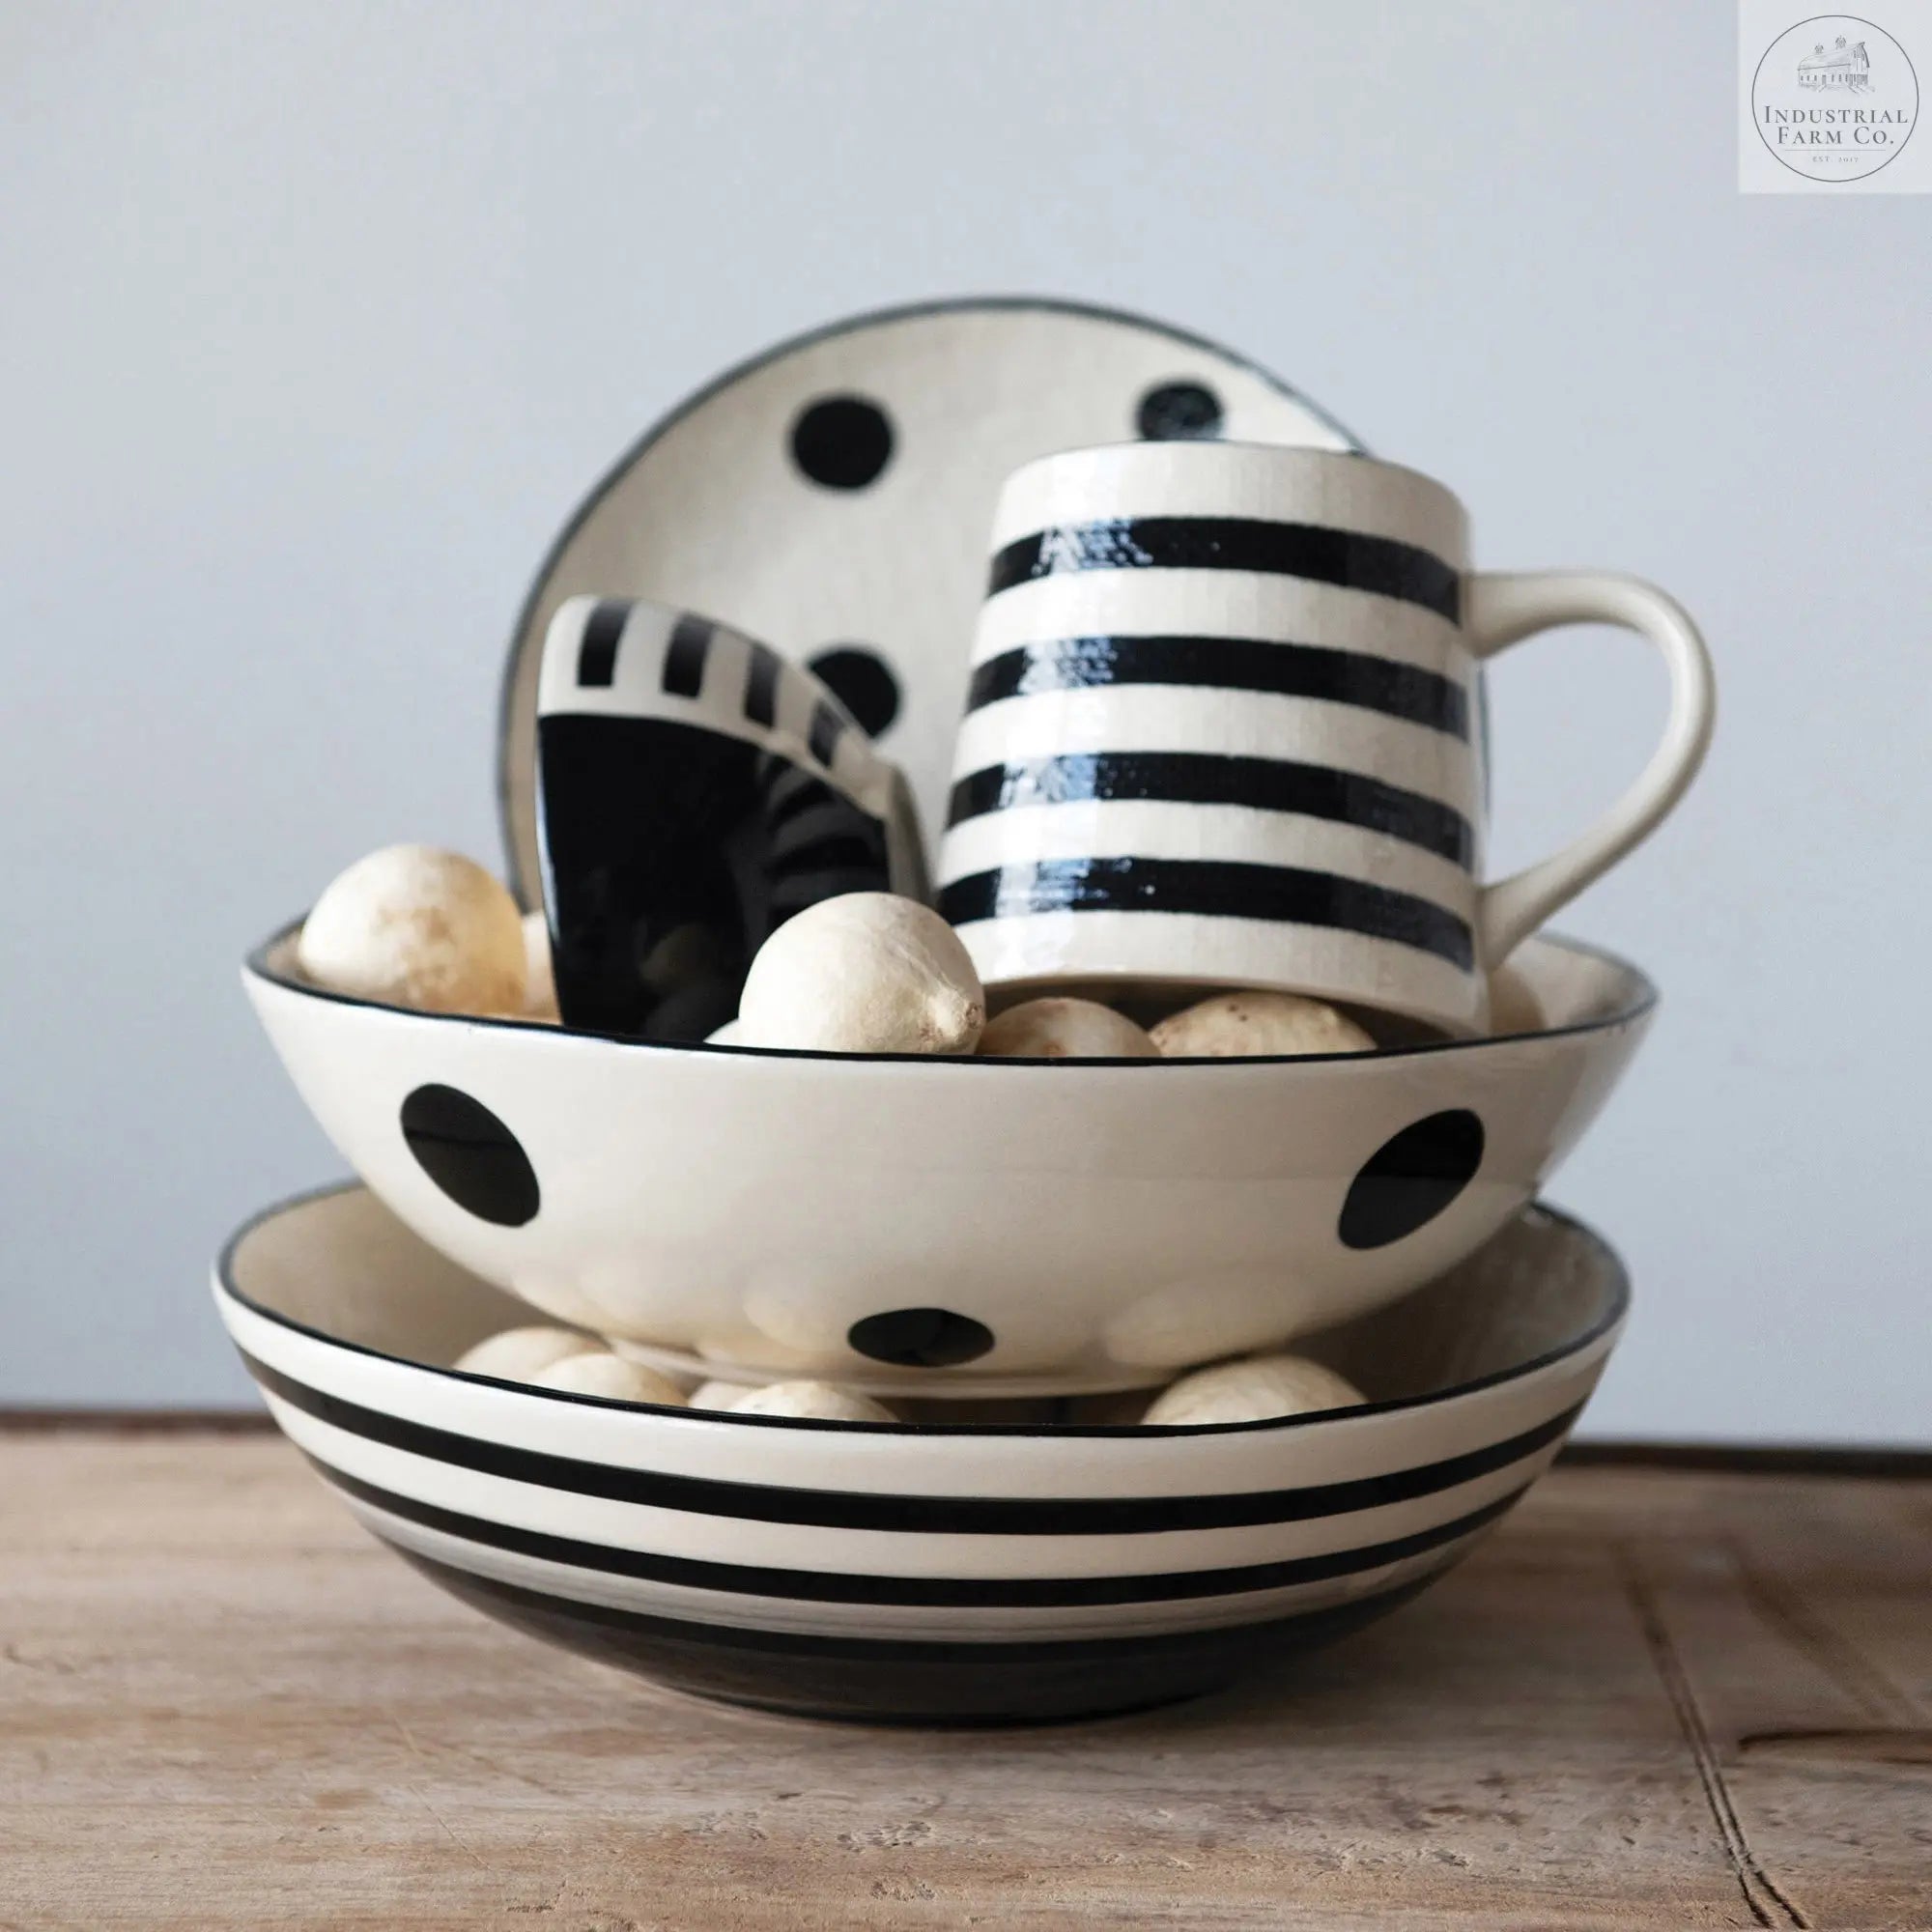 The Walker Hand Painted Serving Bowl  Stripes   | Industrial Farm Co